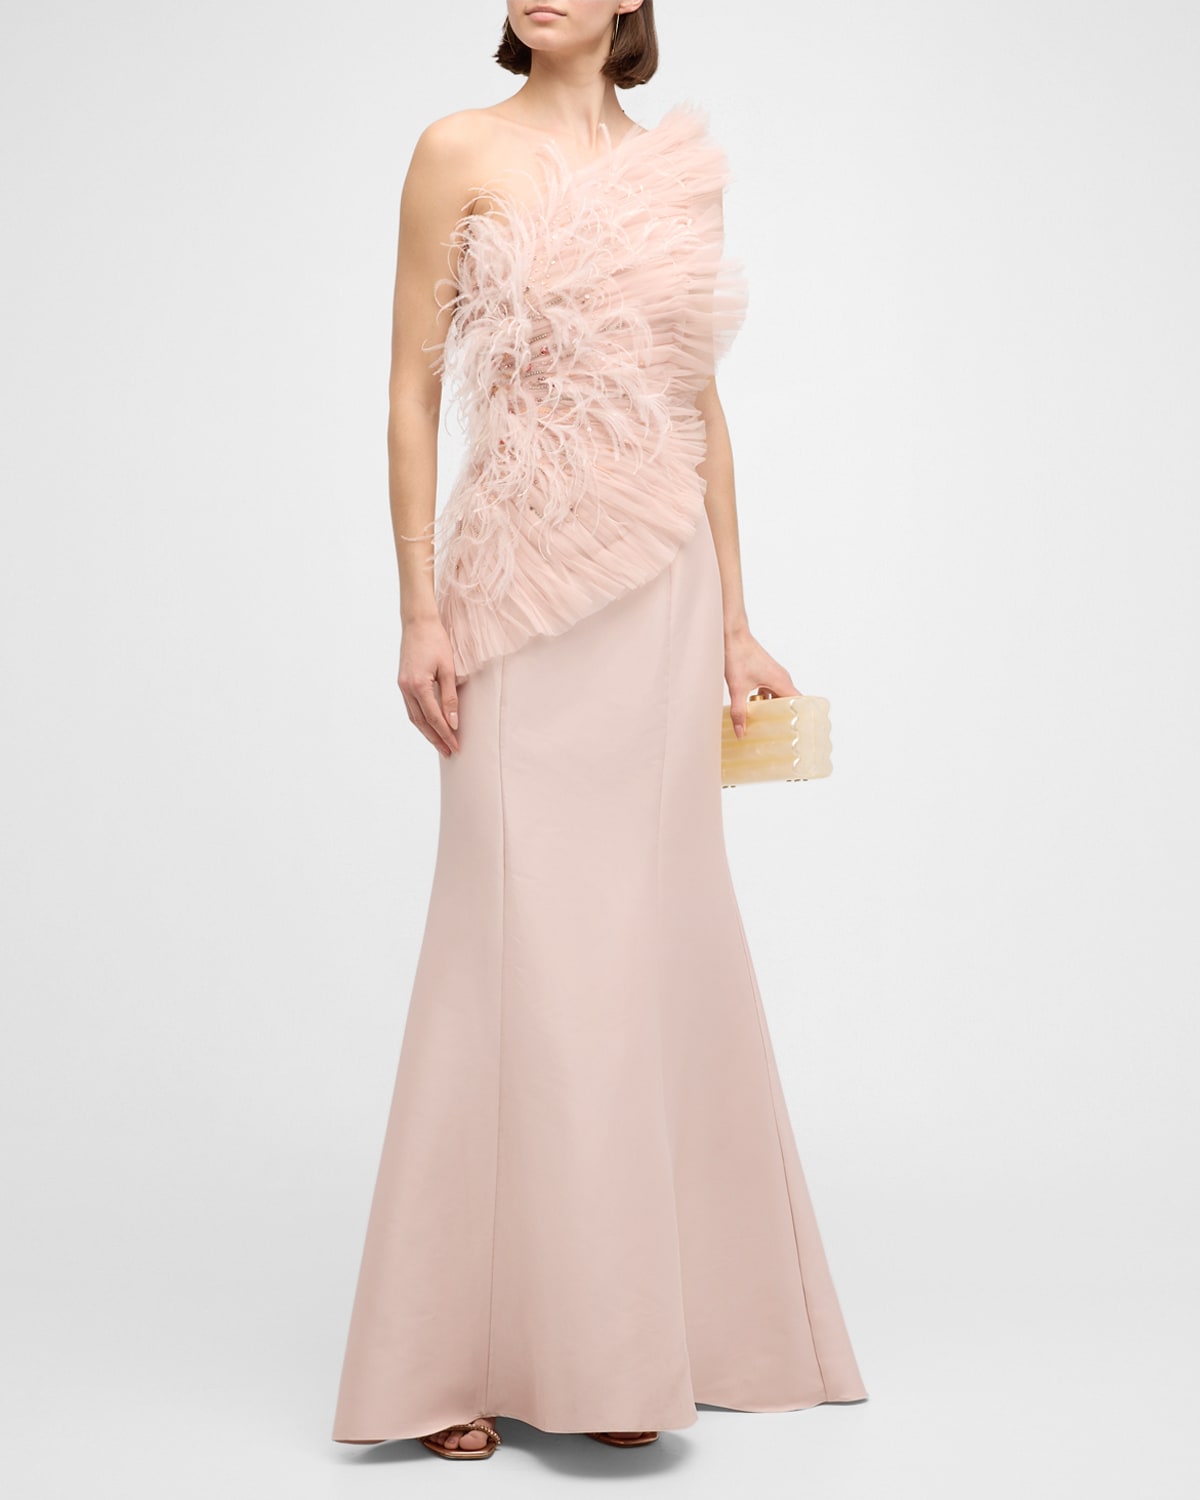 BADGLEY MISCHKA STRAPLESS FEATHER-EMBELLISHED RUFFLE GOWN